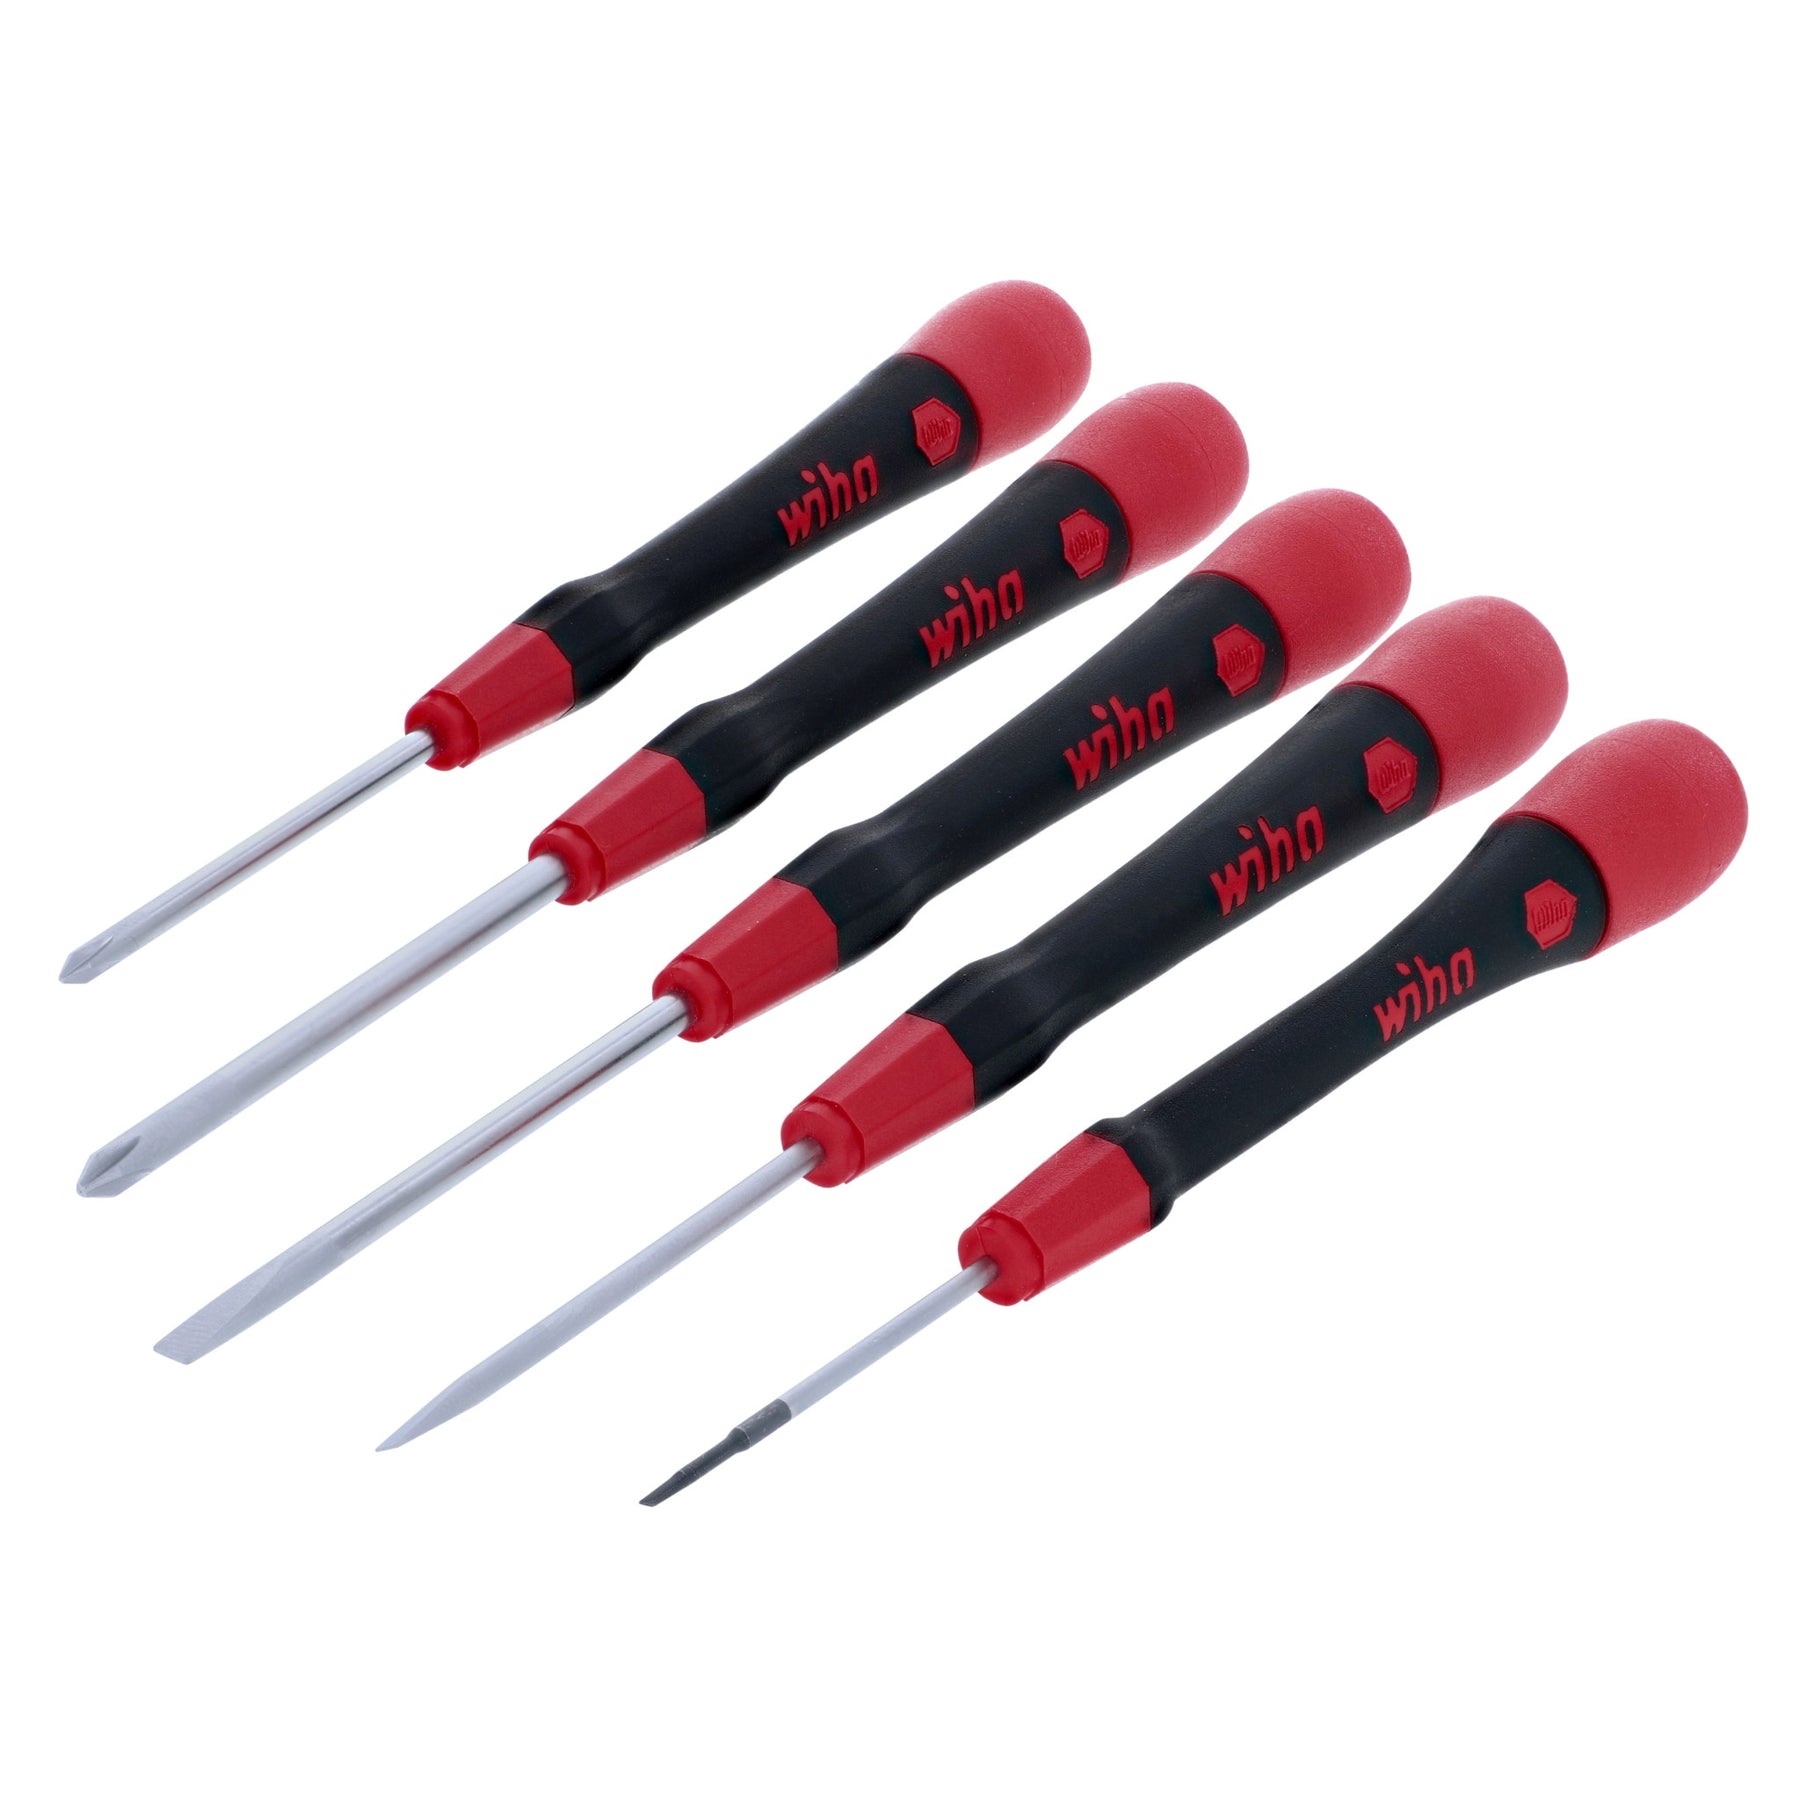 Wiha 26195 5 Piece PicoFinish Slotted and Phillips Precision Screwdriver Set